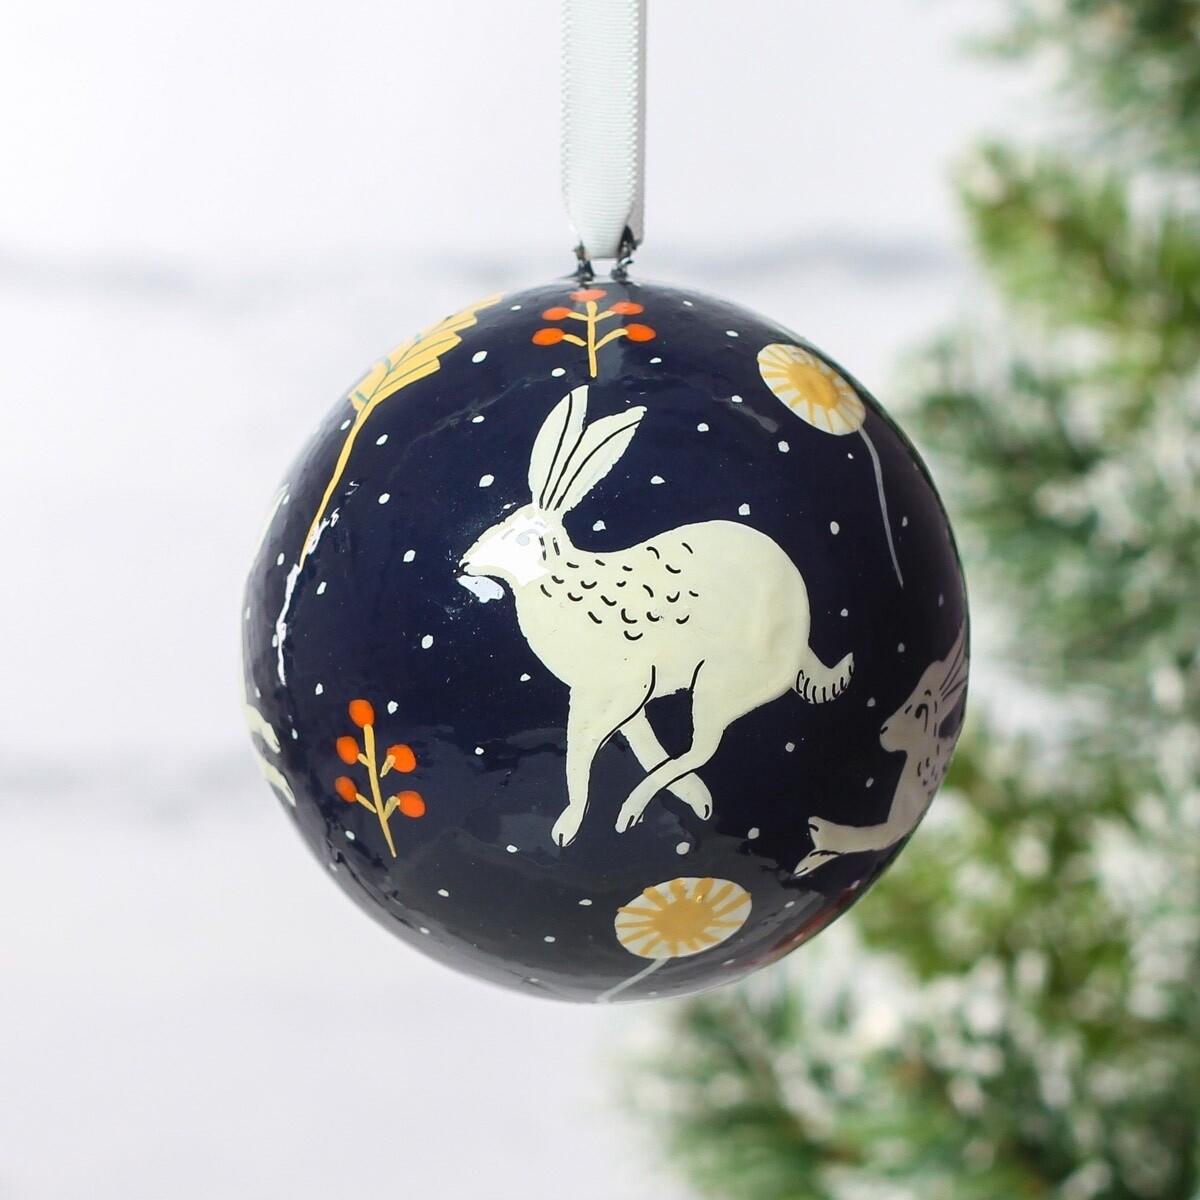 Hand Painted Papier Mâché Bauble - Hare in Snow by Fair to Trade